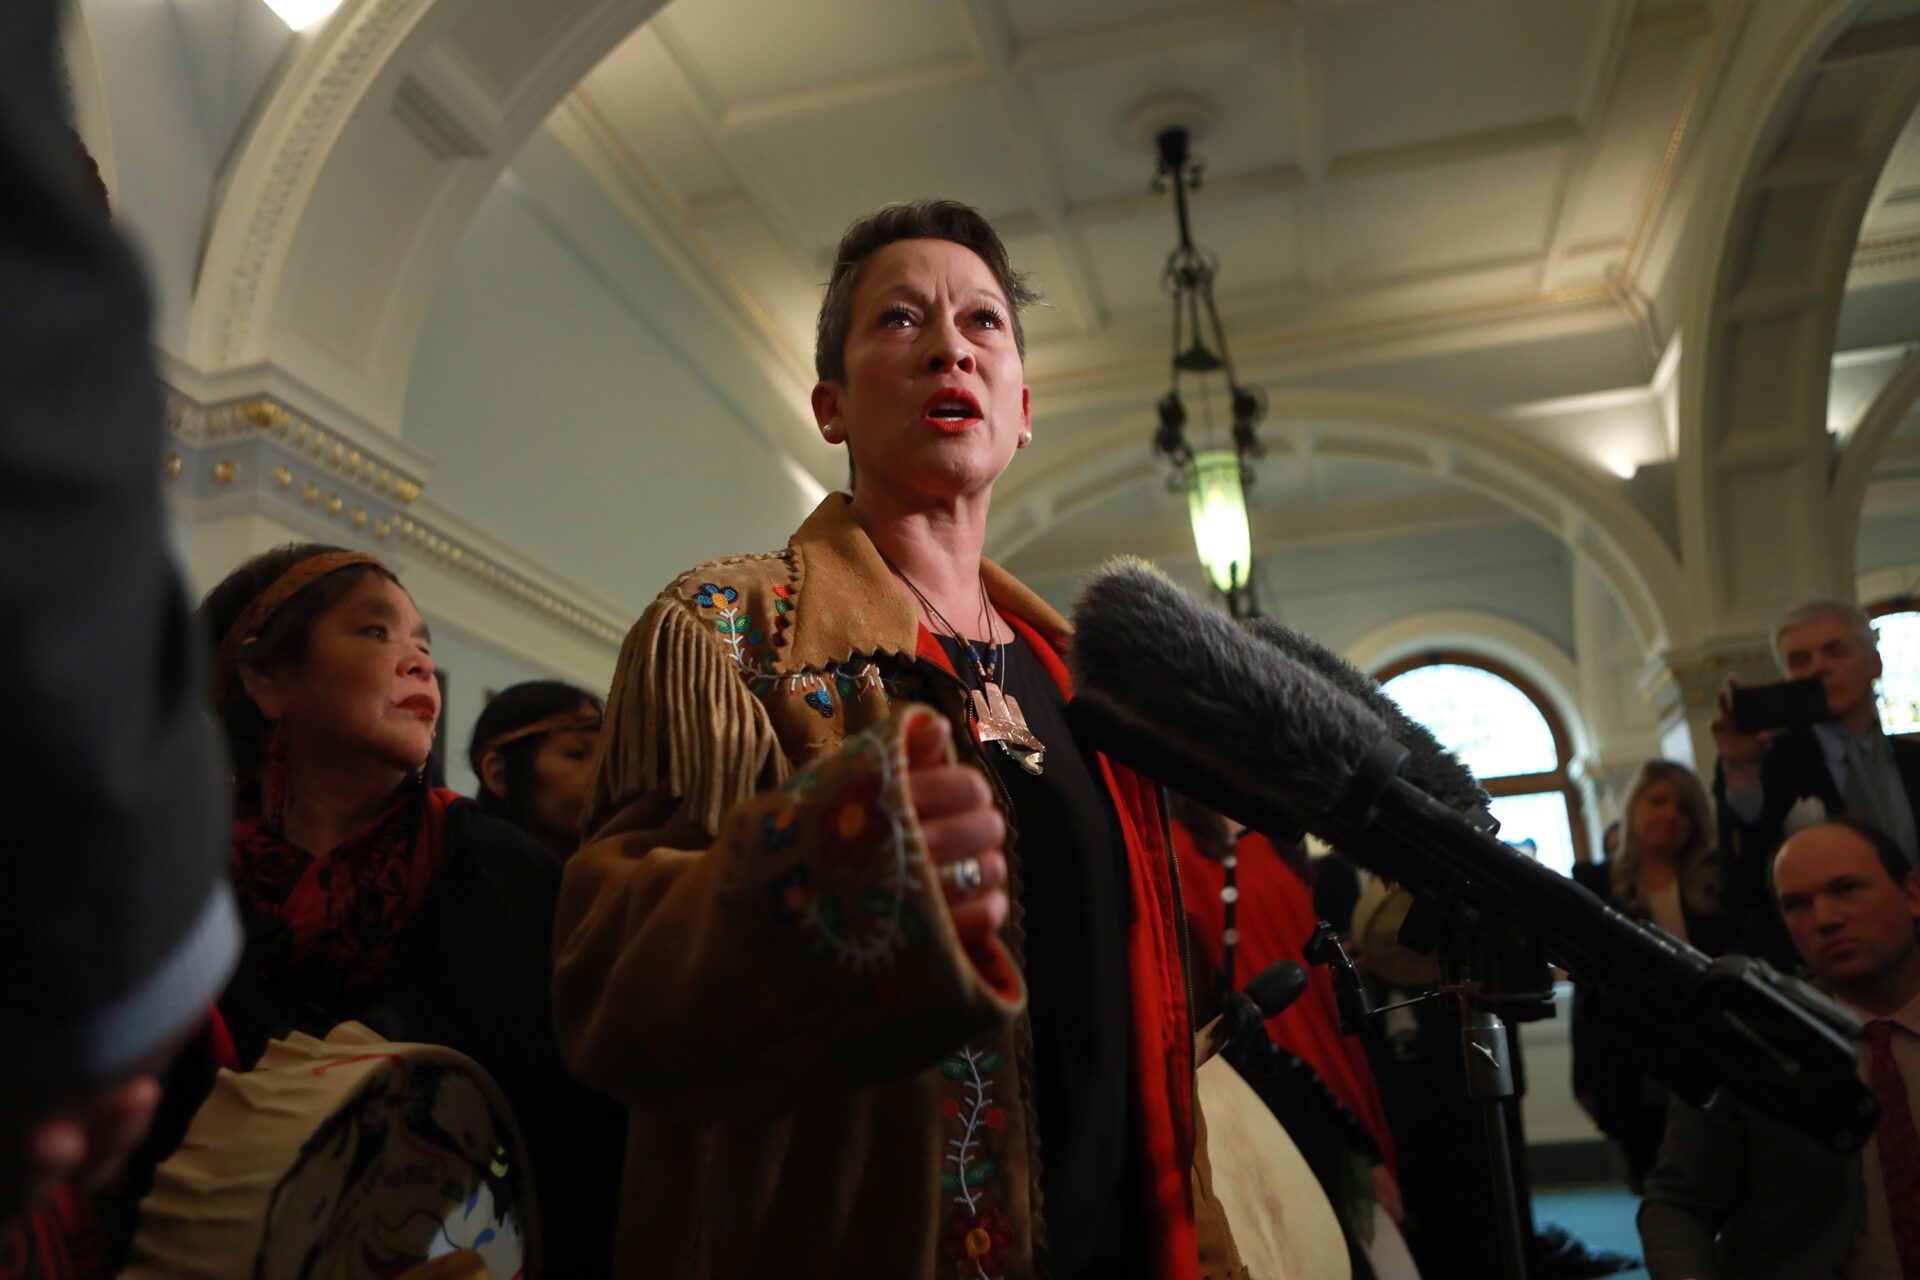 Mark speaks into a cluster of microphones in an elegant room with coffered ceilings and archways. She is surrounded by Indigenous supporters. She holds a flat, wide drum at her hip and is dressed in a tan rawhide jacket with tassels and green, pink and red flowers painted on the cuff paired with a black shirt. She’s got a bronze ornament on a beaded chain around her neck.